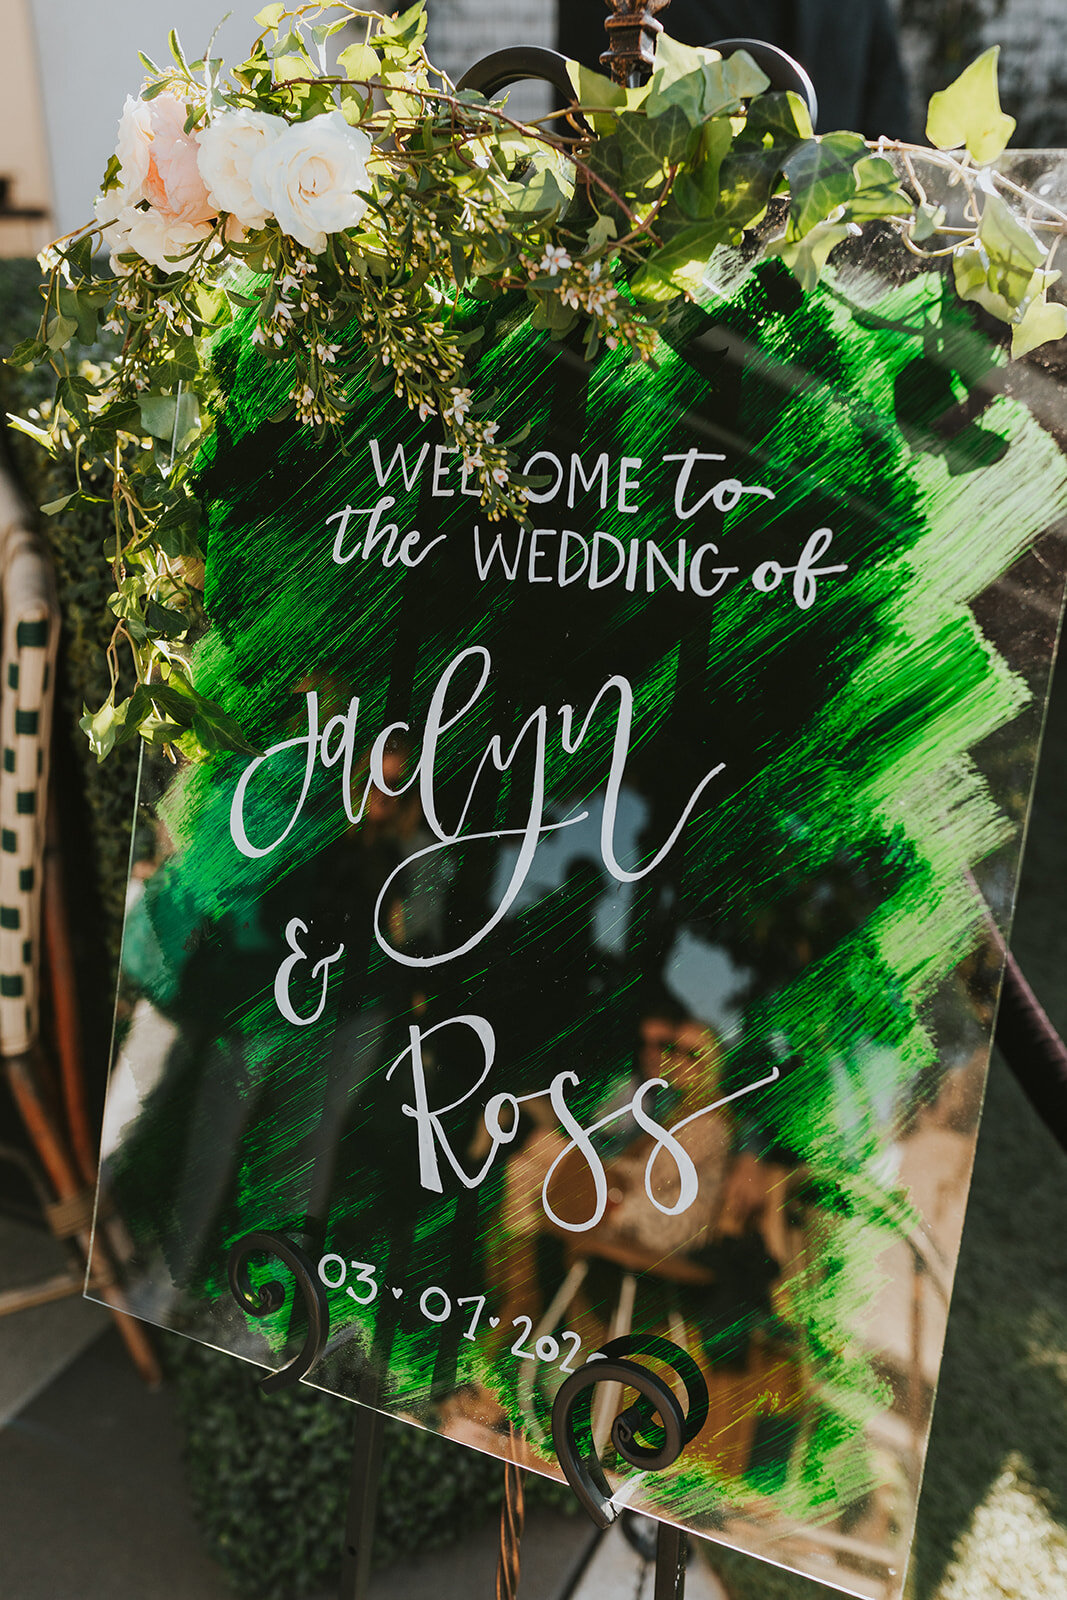 ivory-and-beau-wedding-and-florals-jaclyn-and-ross-wedding-coordinator-event-coordinator-savannah-florist-wedding-florist-wedding-flowers-wedding-florals-wedding-planning-Balthazor_WHV-38.jpg